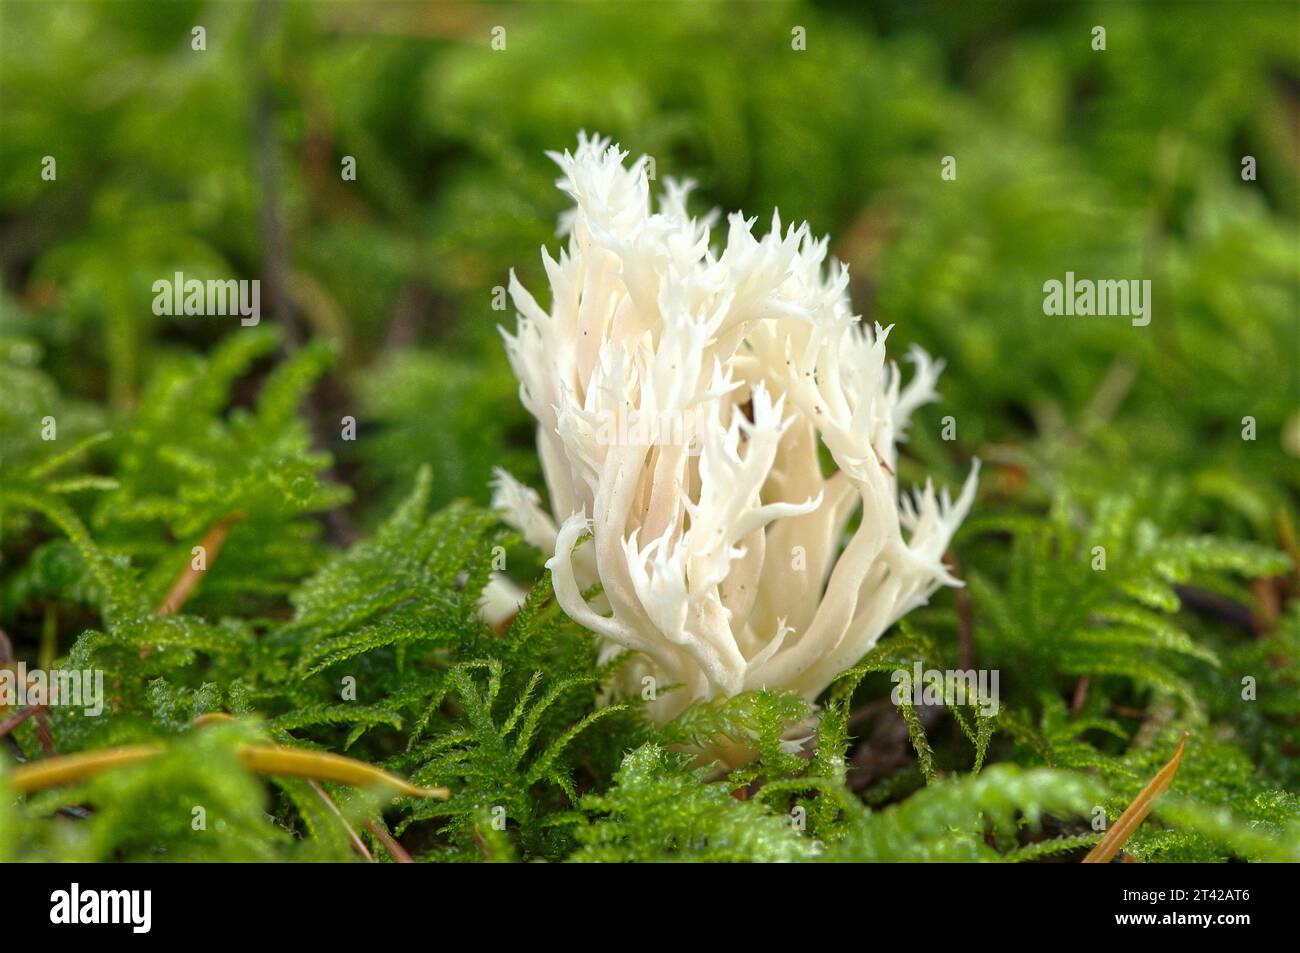 White Coral Fungus or Crested Coral Fungus (Clavulina cristata) growing in a bed of moss. British Columbia, Canada. Stock Photo